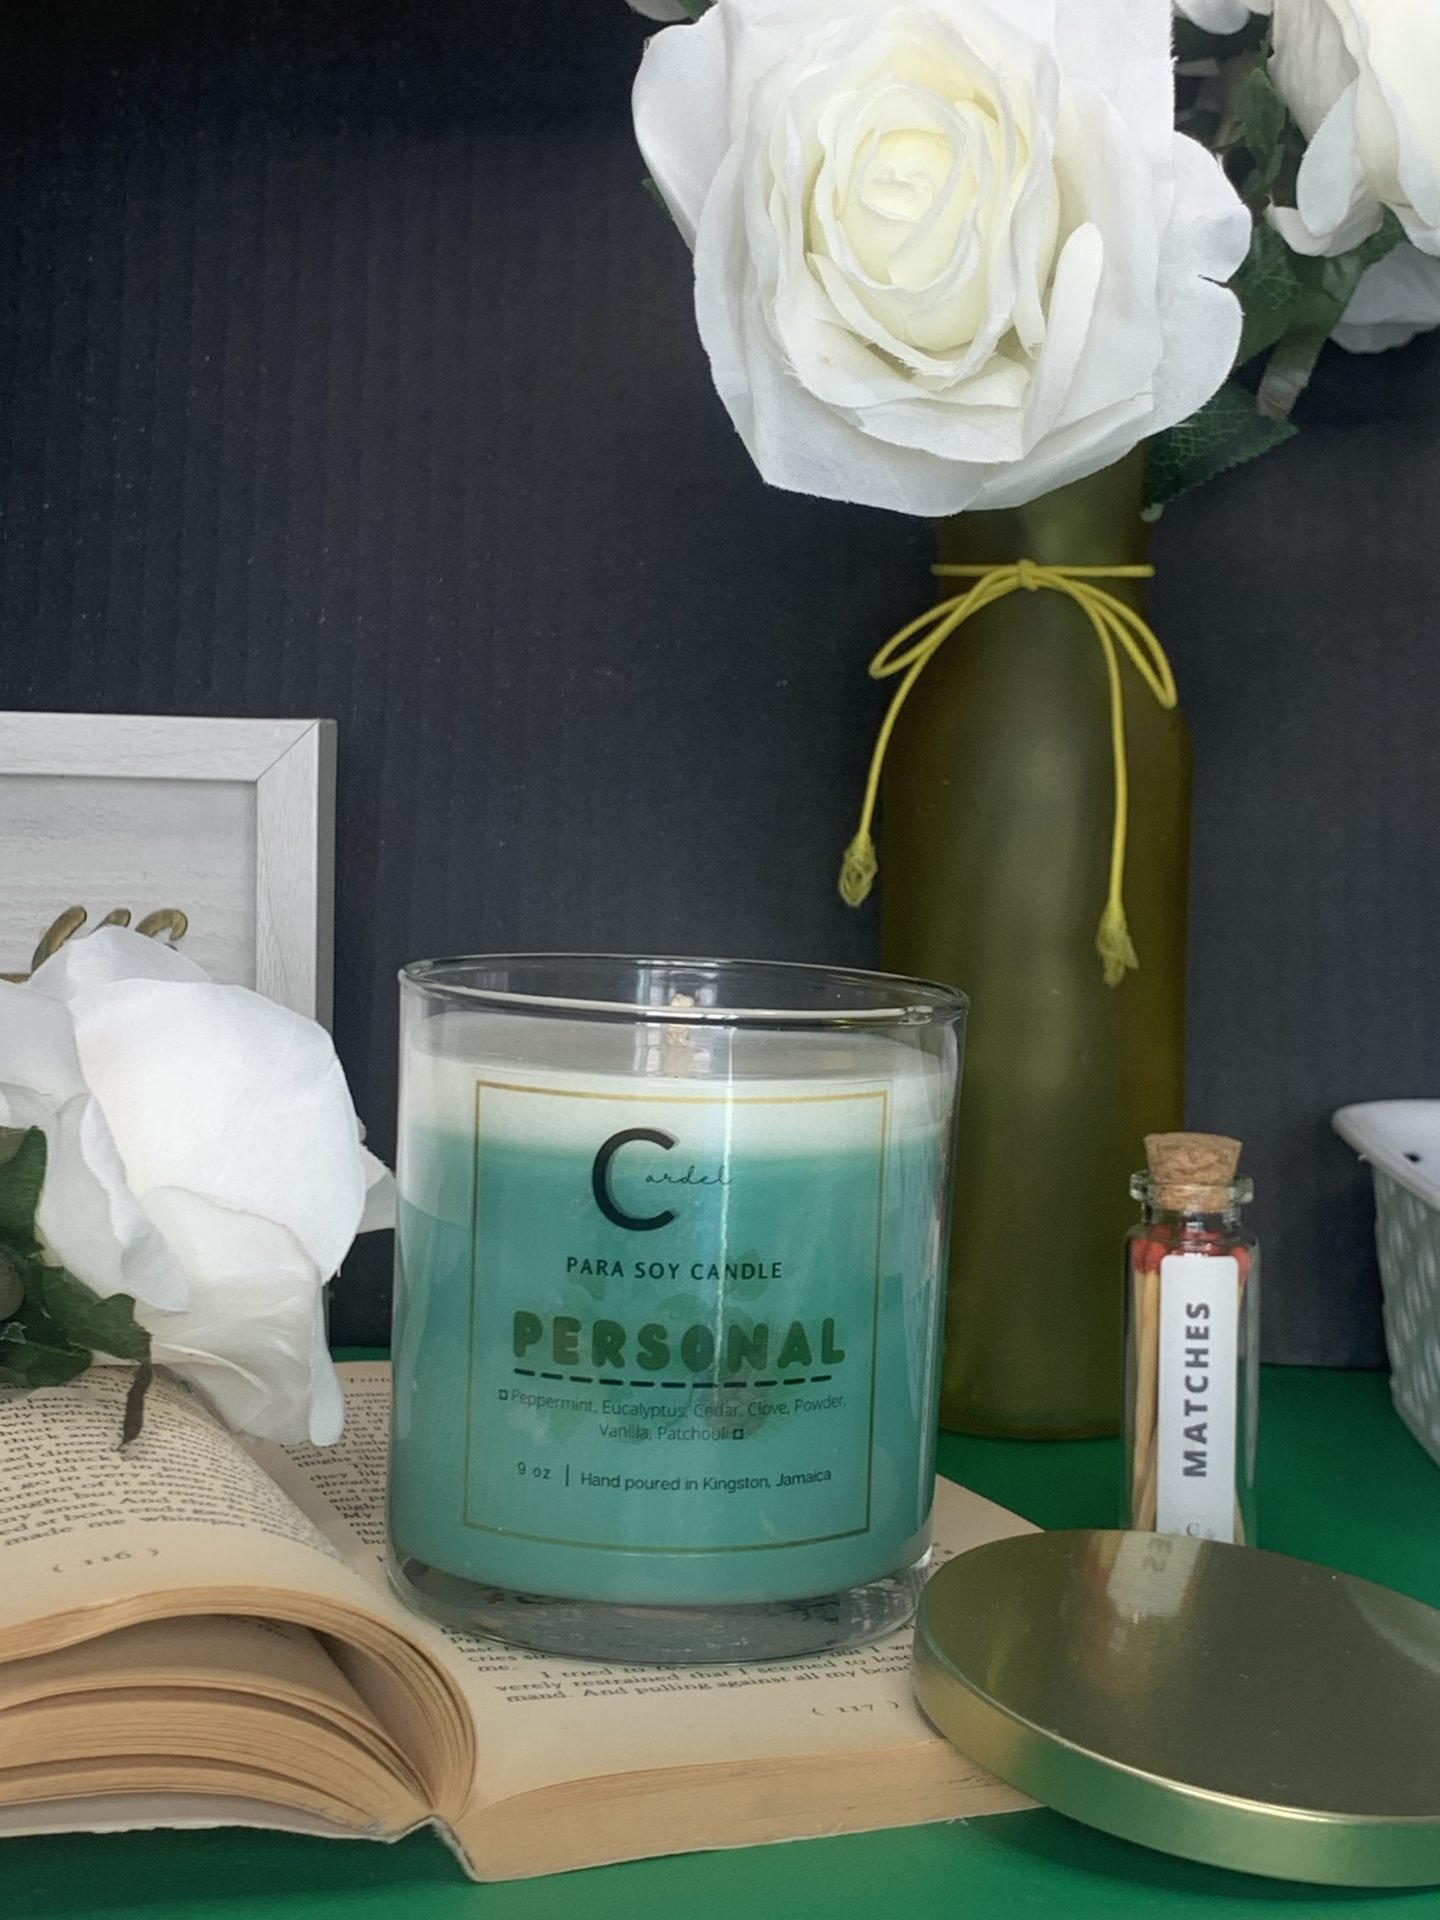 9oz Personal candle